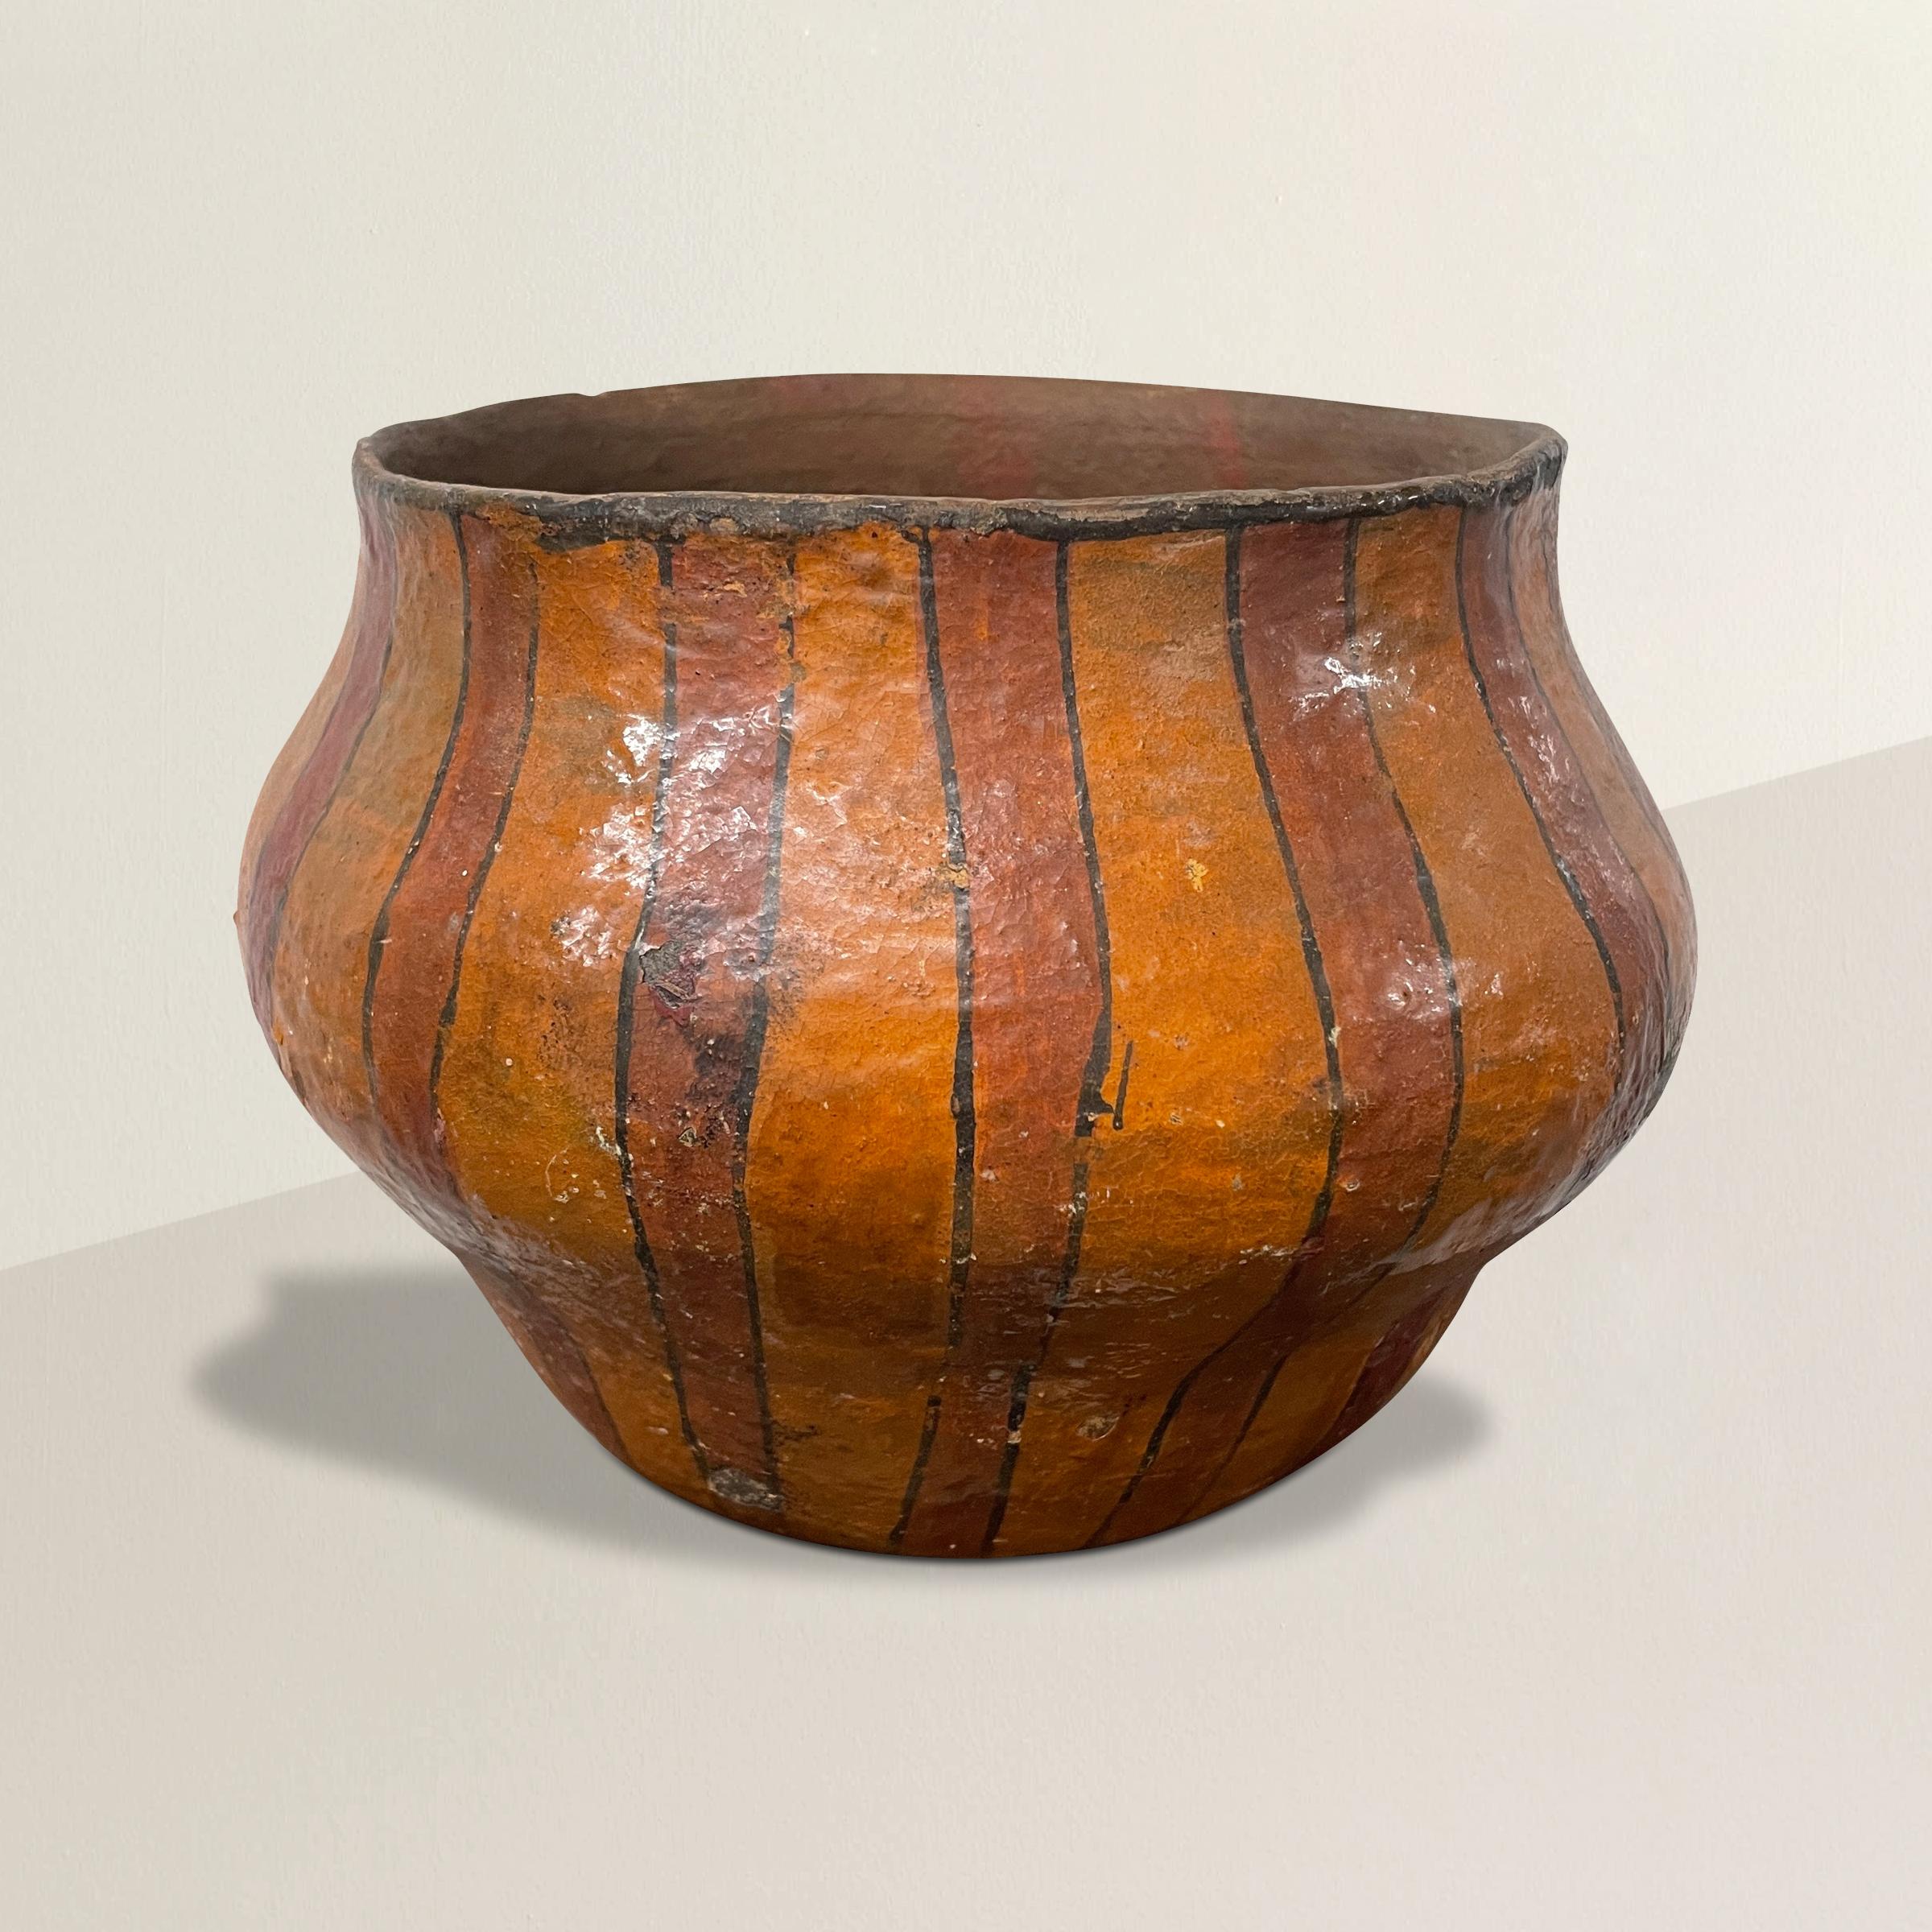 A striking 20th century Amazonian Shipibo pot hand-built from clay, decorated with wide red and orange lines, and glazed with the sap of a tree. Members of the Shipibo tribe create the pot, usually decorated with stylized geometric floral and animal